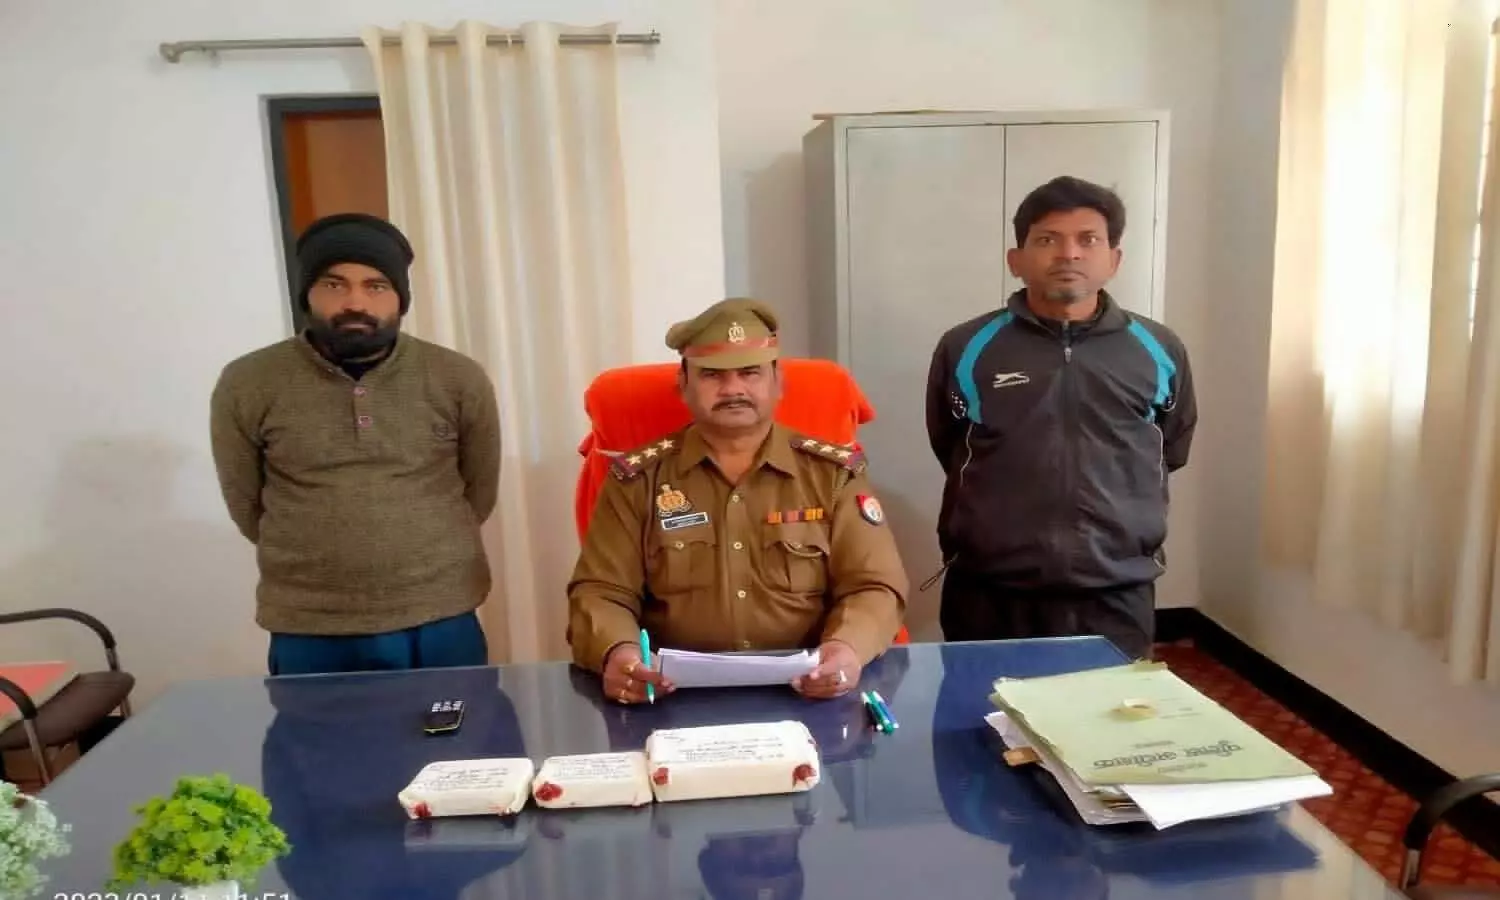 Two arrested in Sonbhadra for releasing vehicles stopped in overloading and illegal transportation on fake release orders